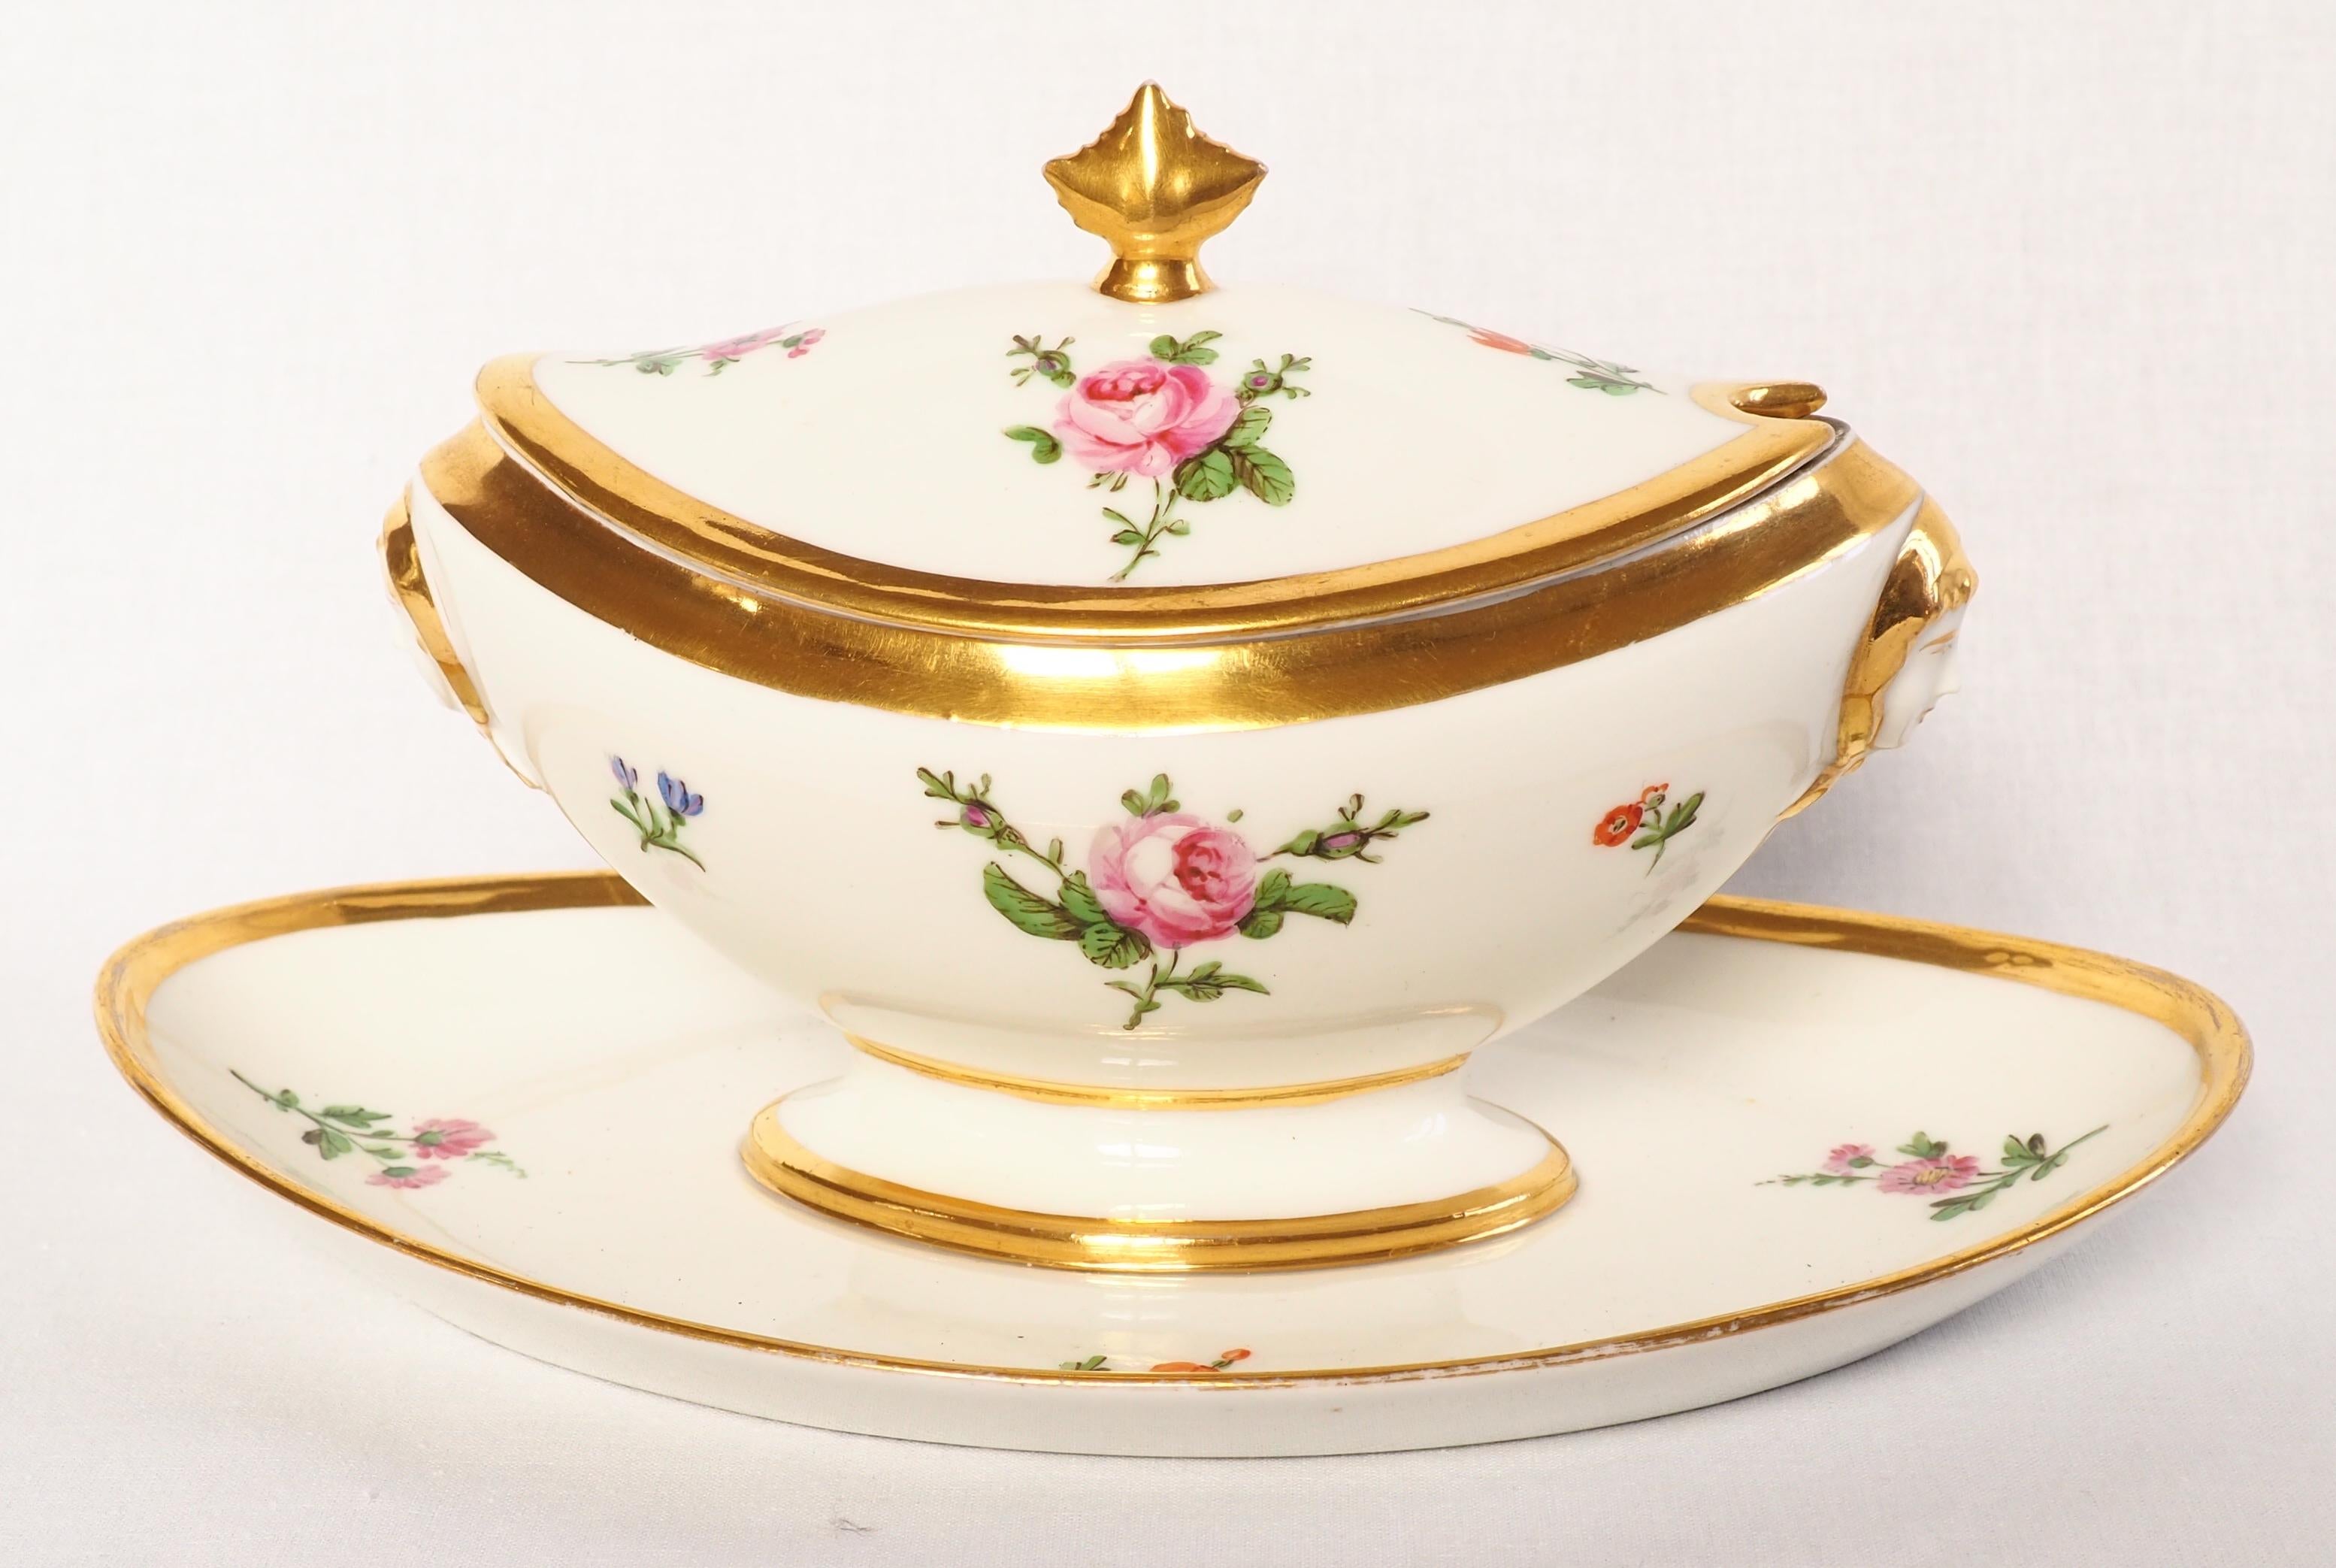 French Schoelcher Manufacture : Empire Paris porcelain sauce boat 19th century - signed For Sale